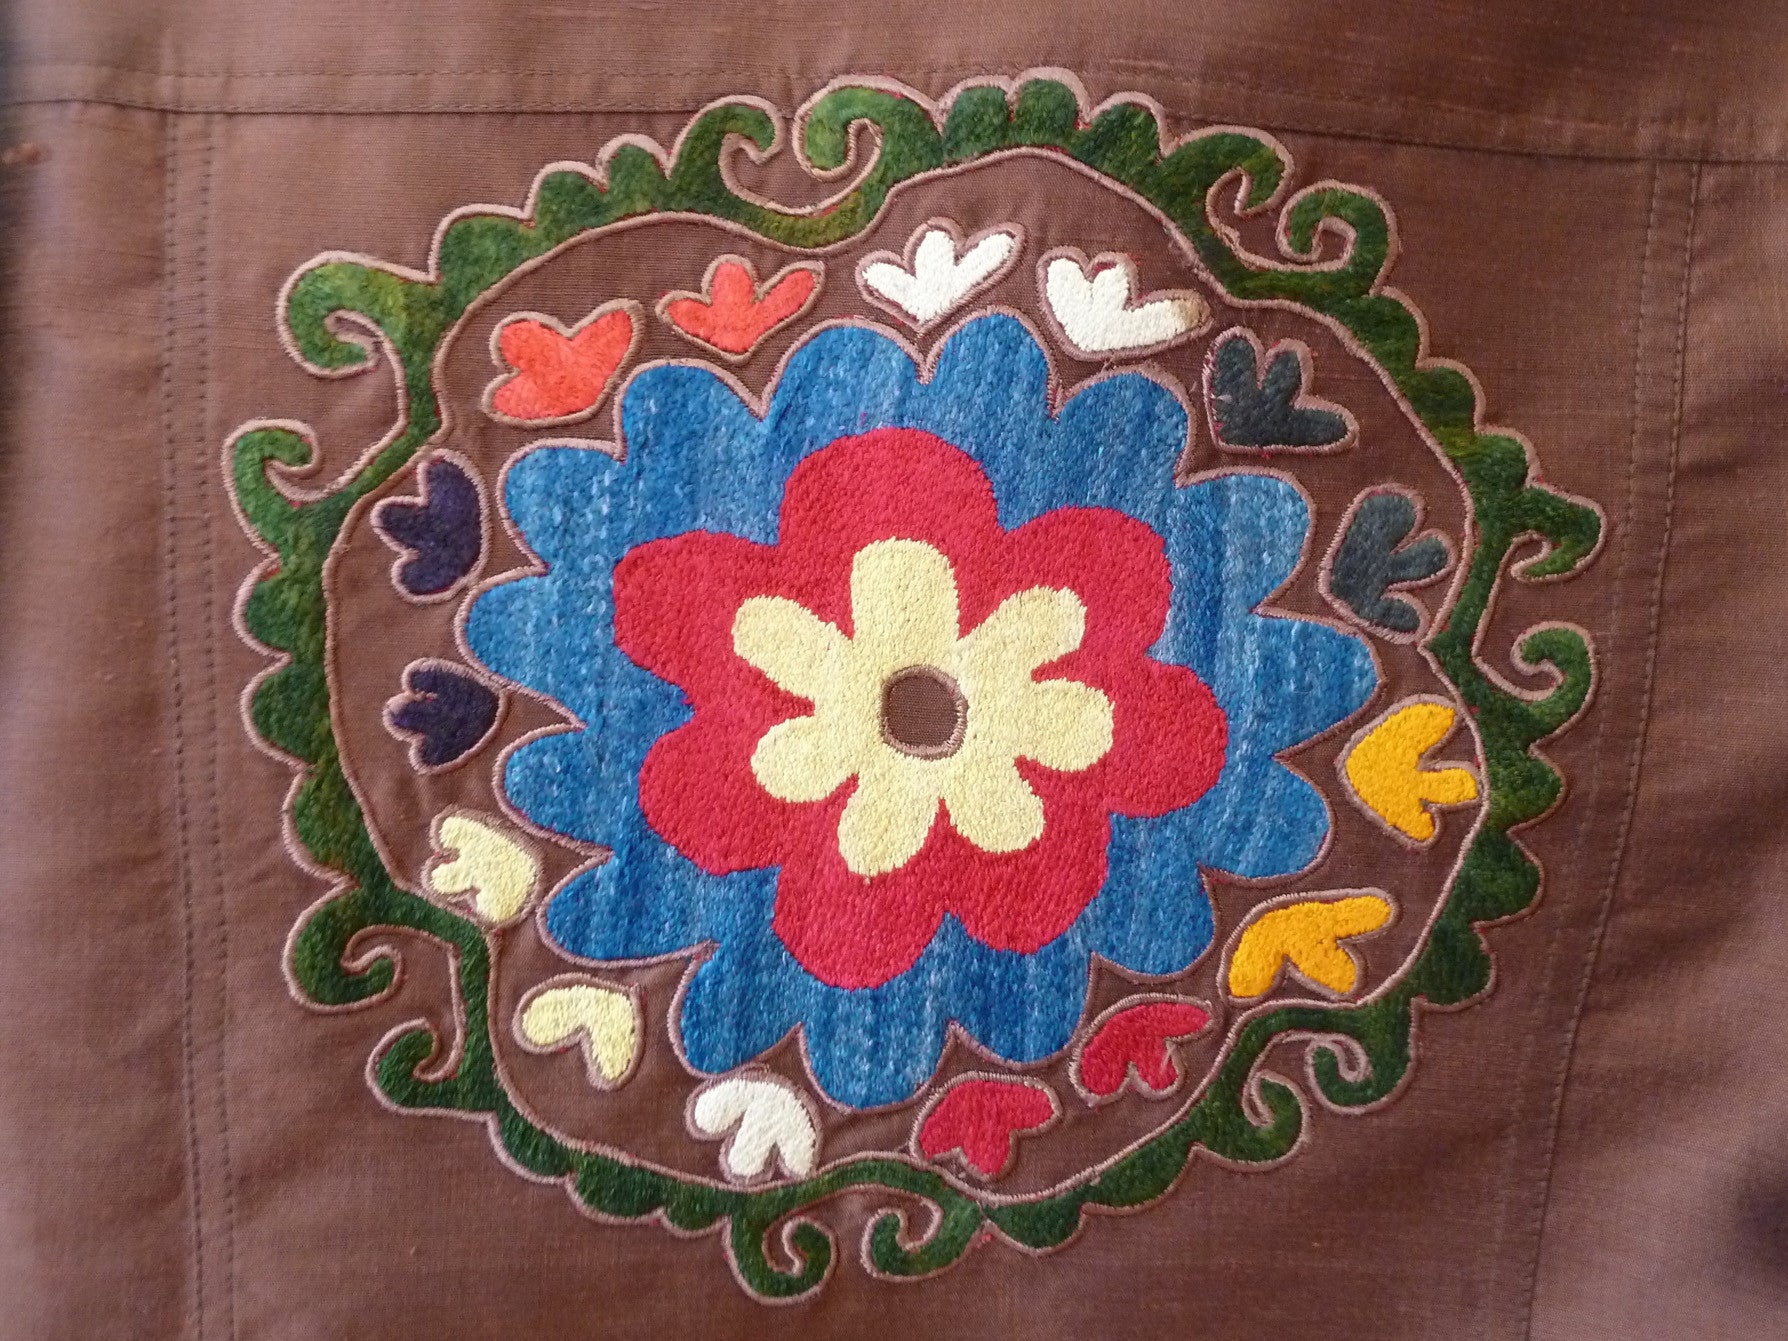 Jean Jacket Vintage Suzani Embroidery Chocolate Coral